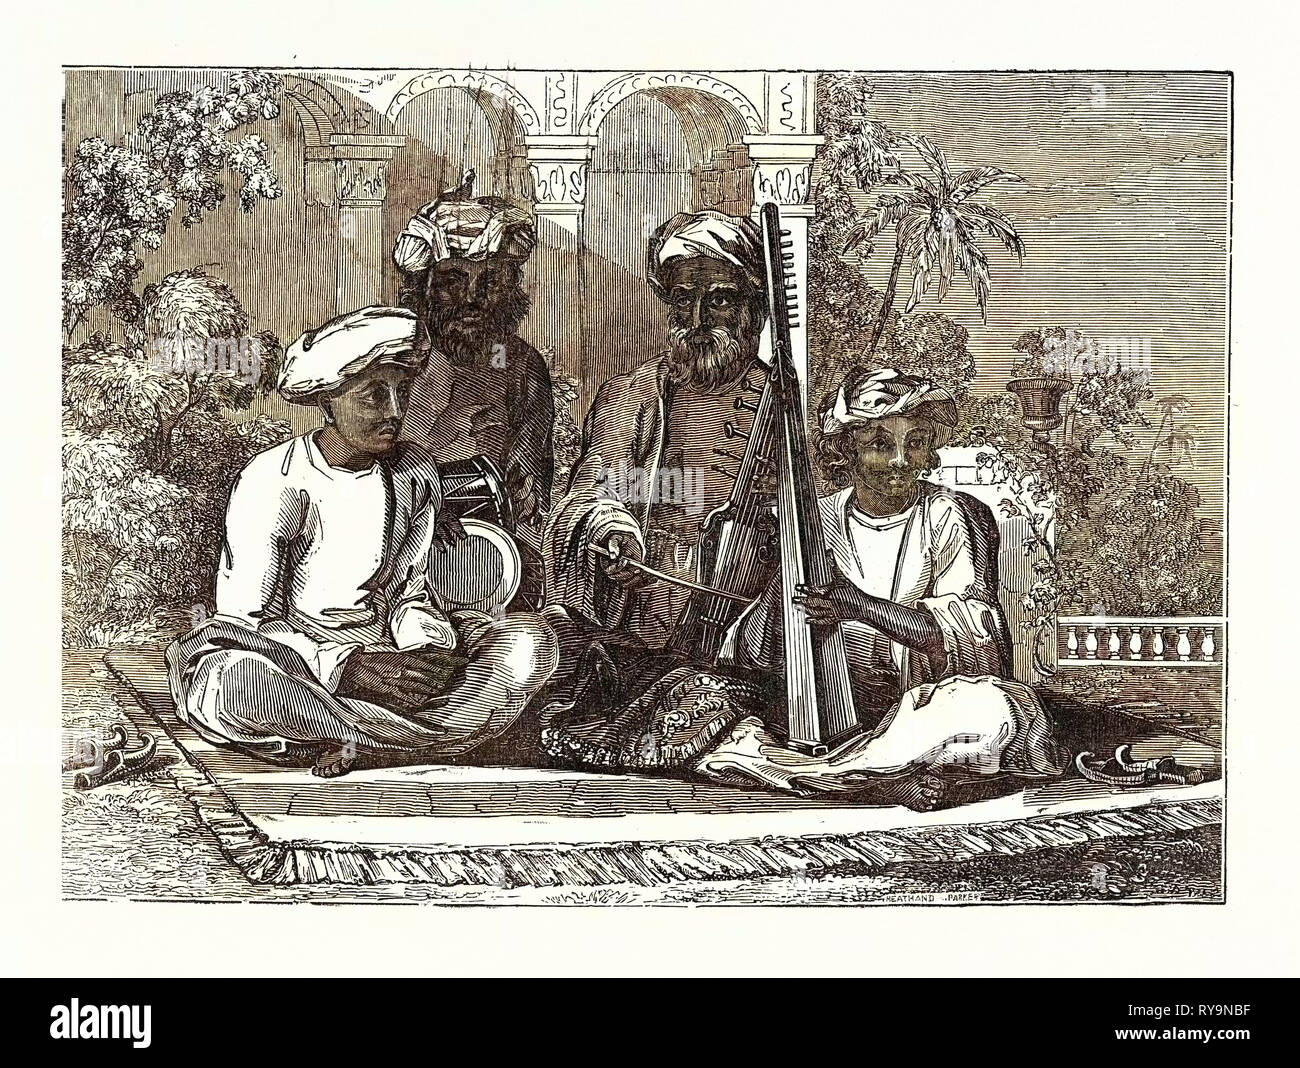 ITINERANT MUSICIANS OF INDIA Stock Photo